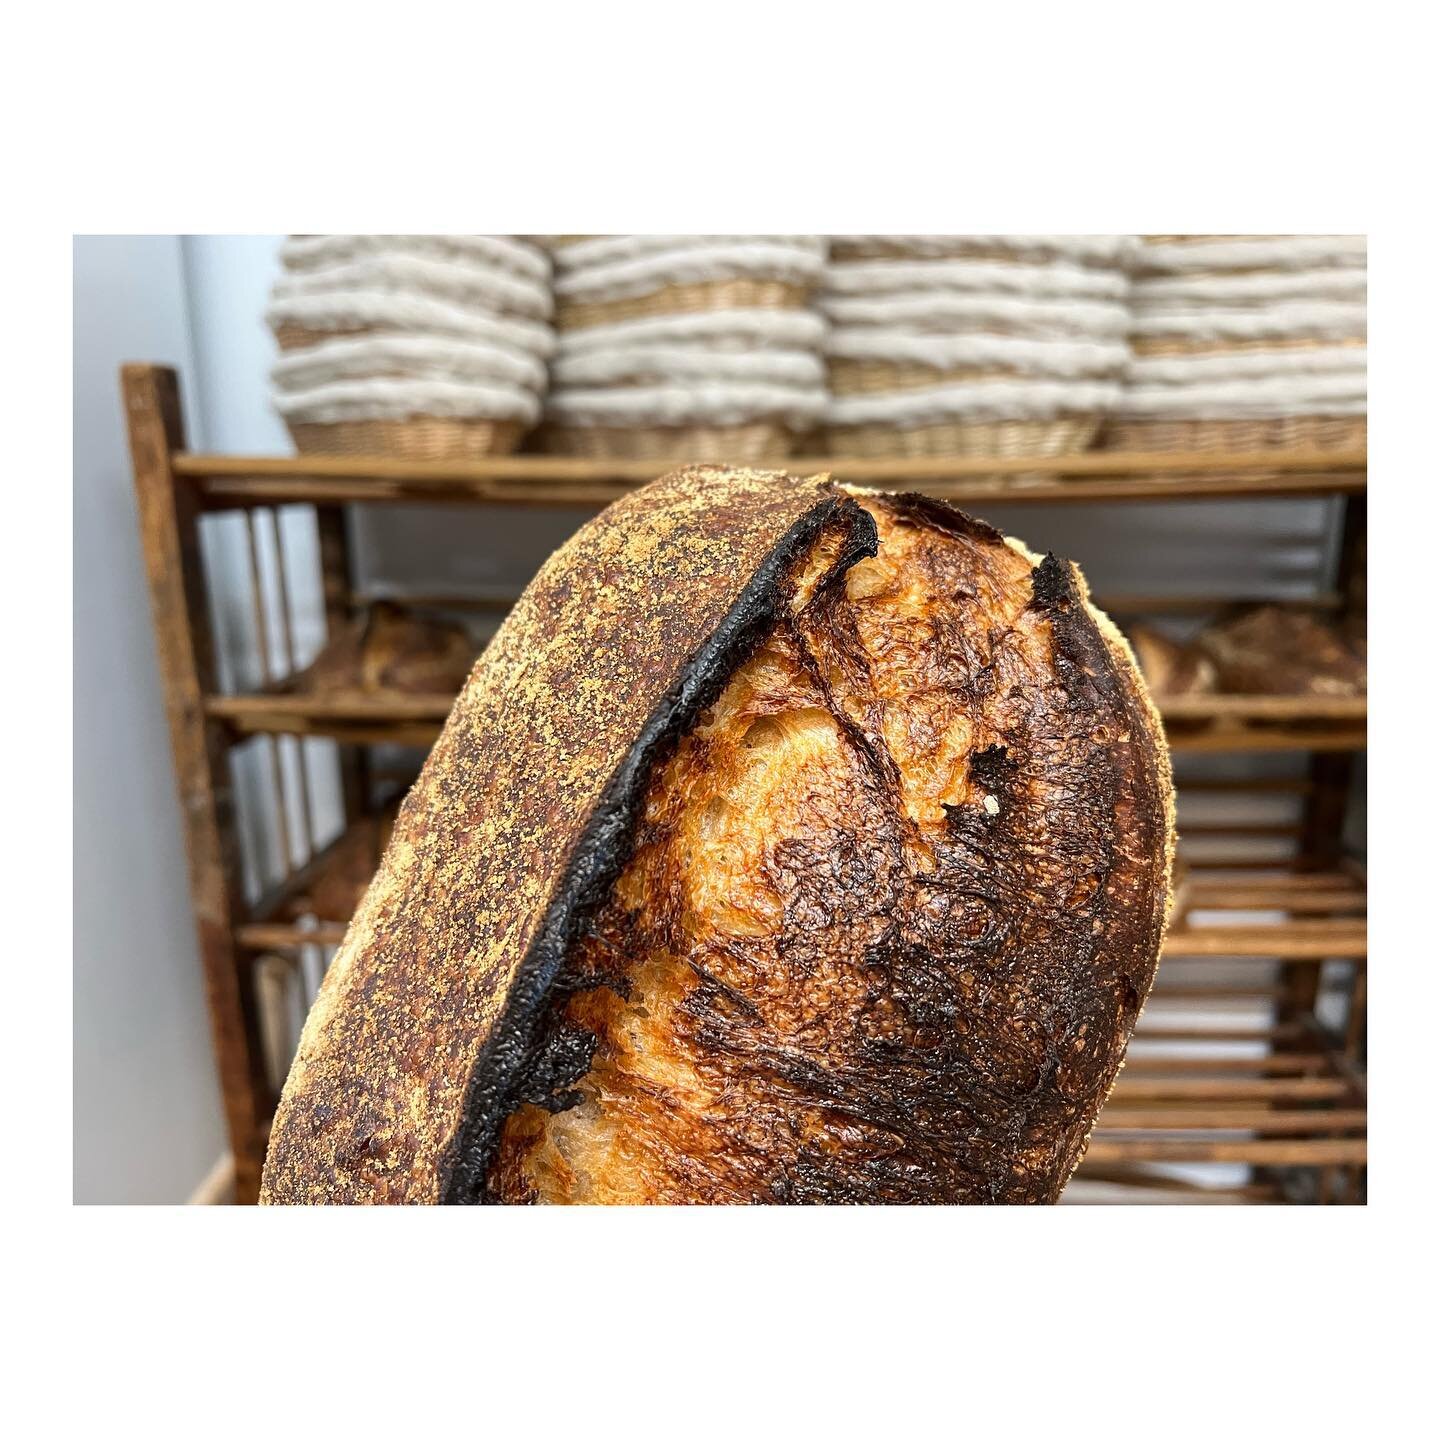 Testing negative and bread orders are live on the website.✌️See you Thursday for some fresh loaves.